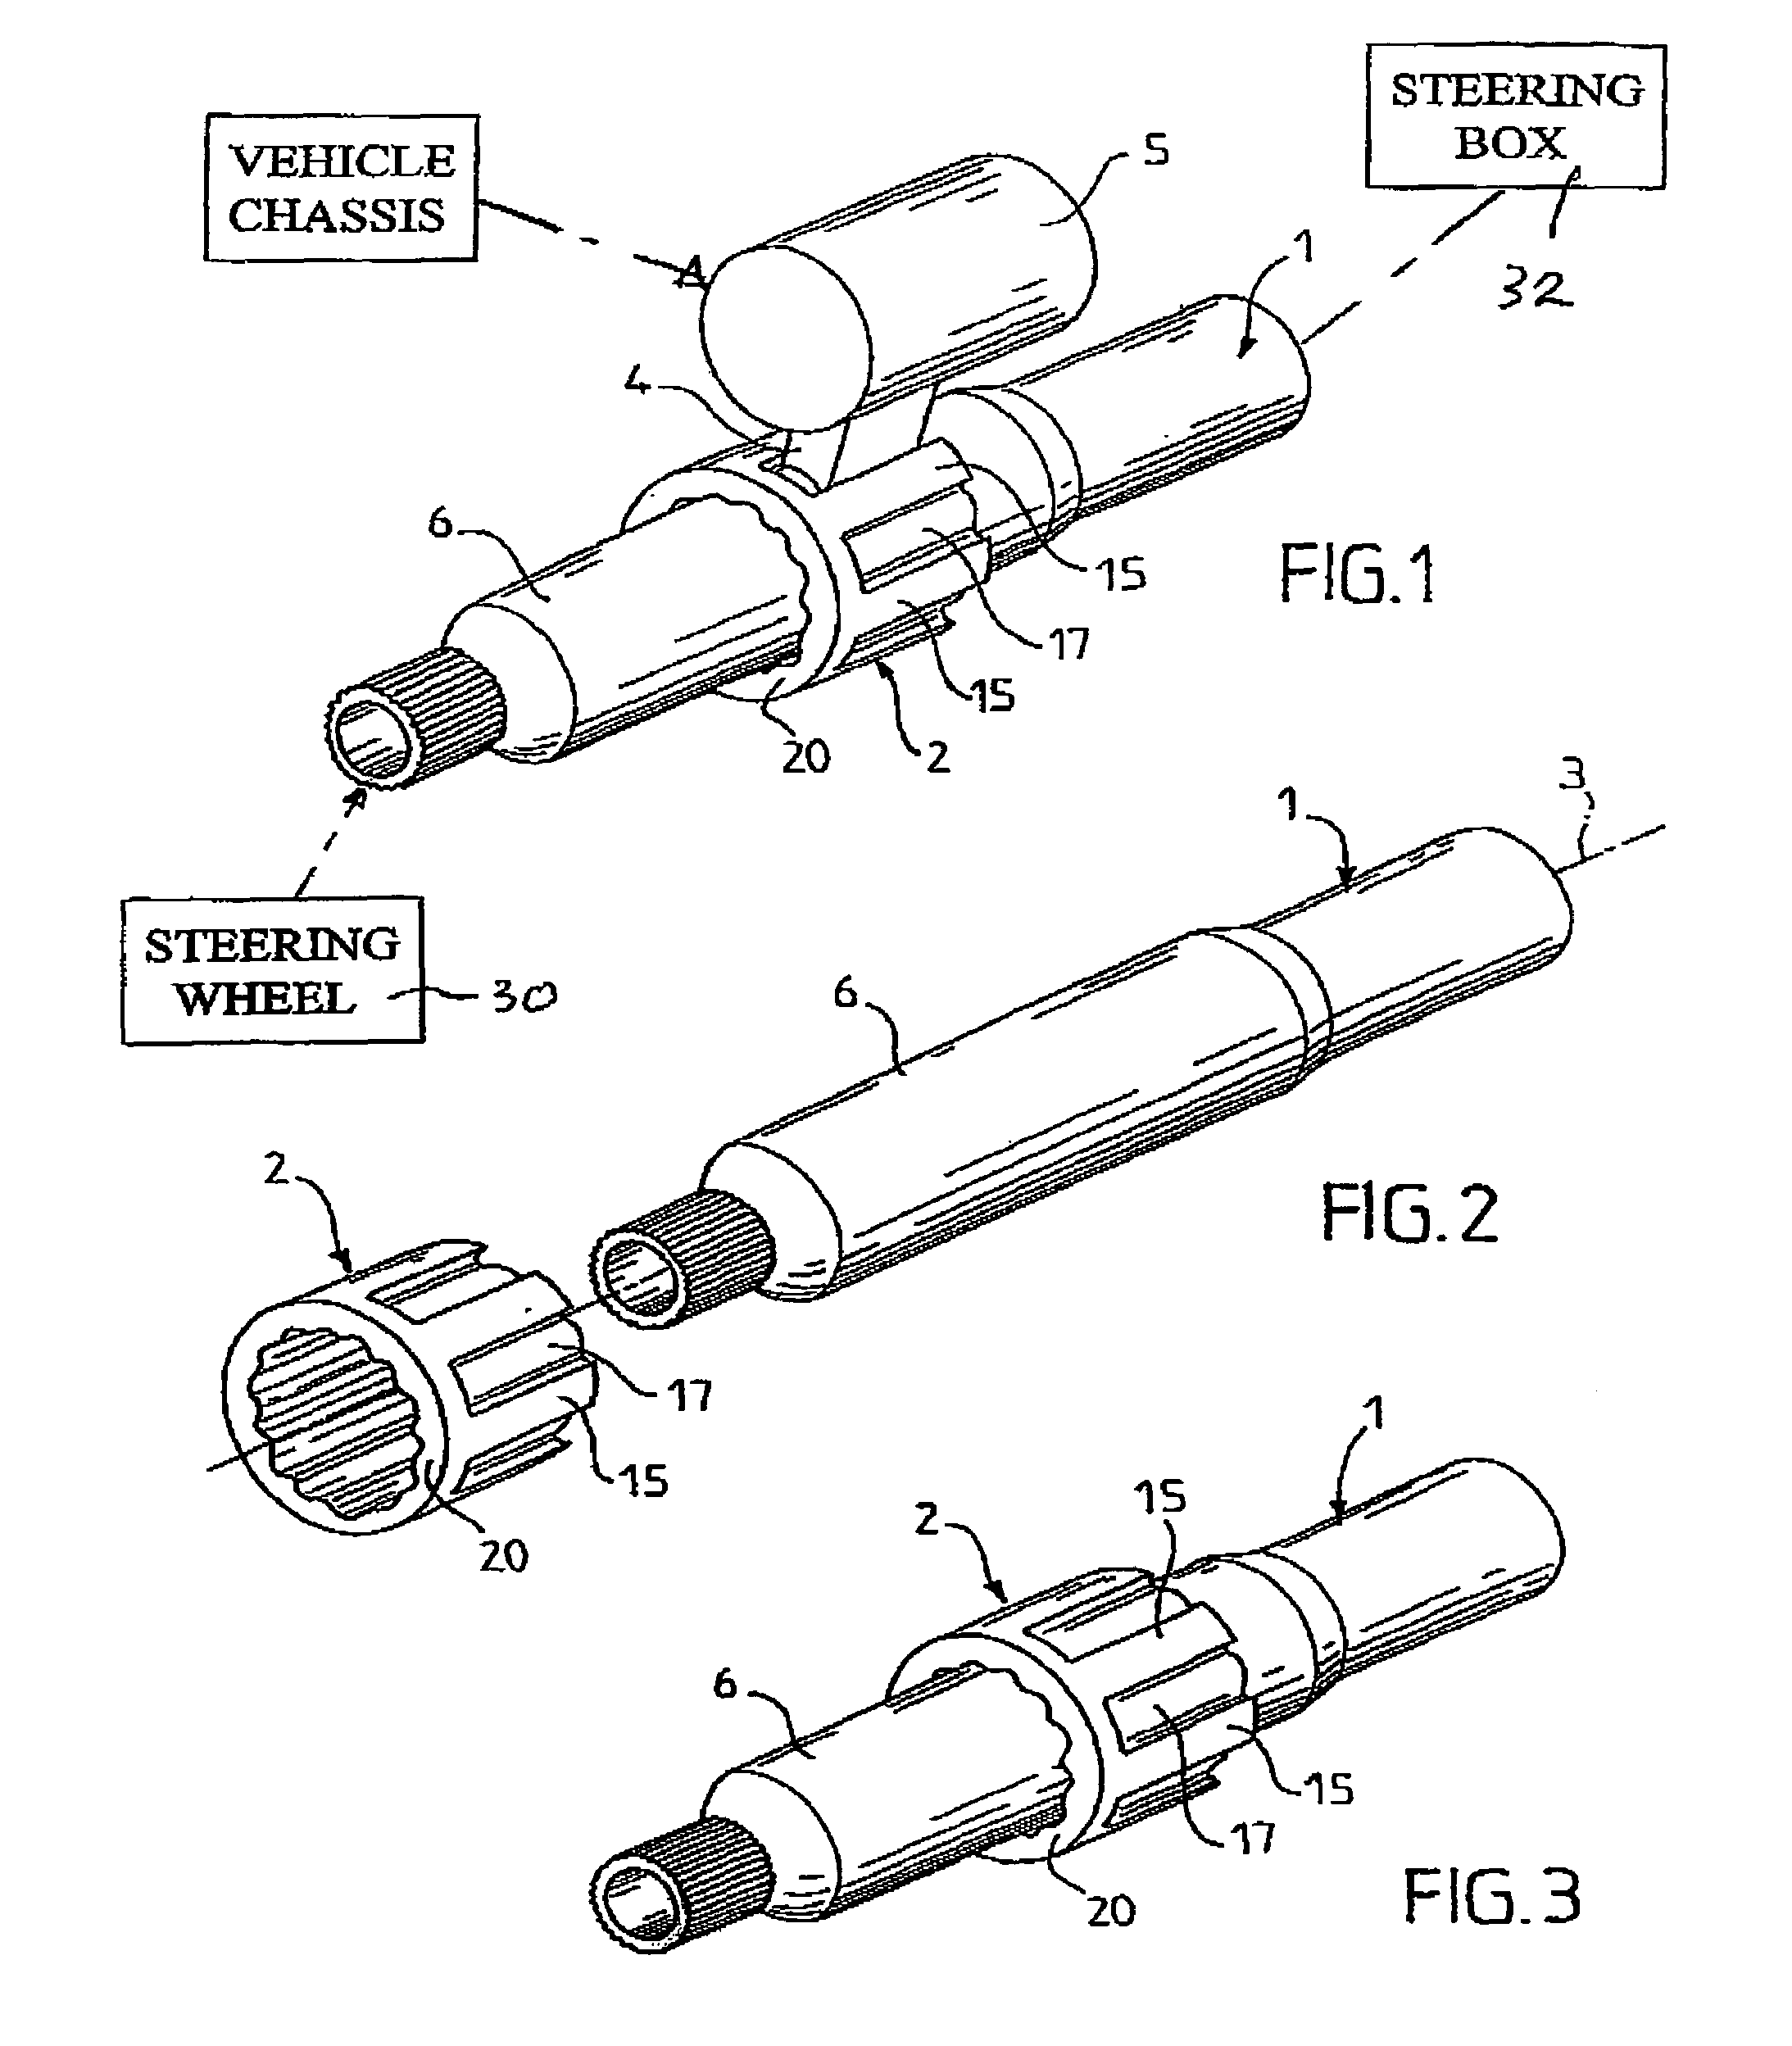 Anti-theft locking means for a vehicle steering shaft